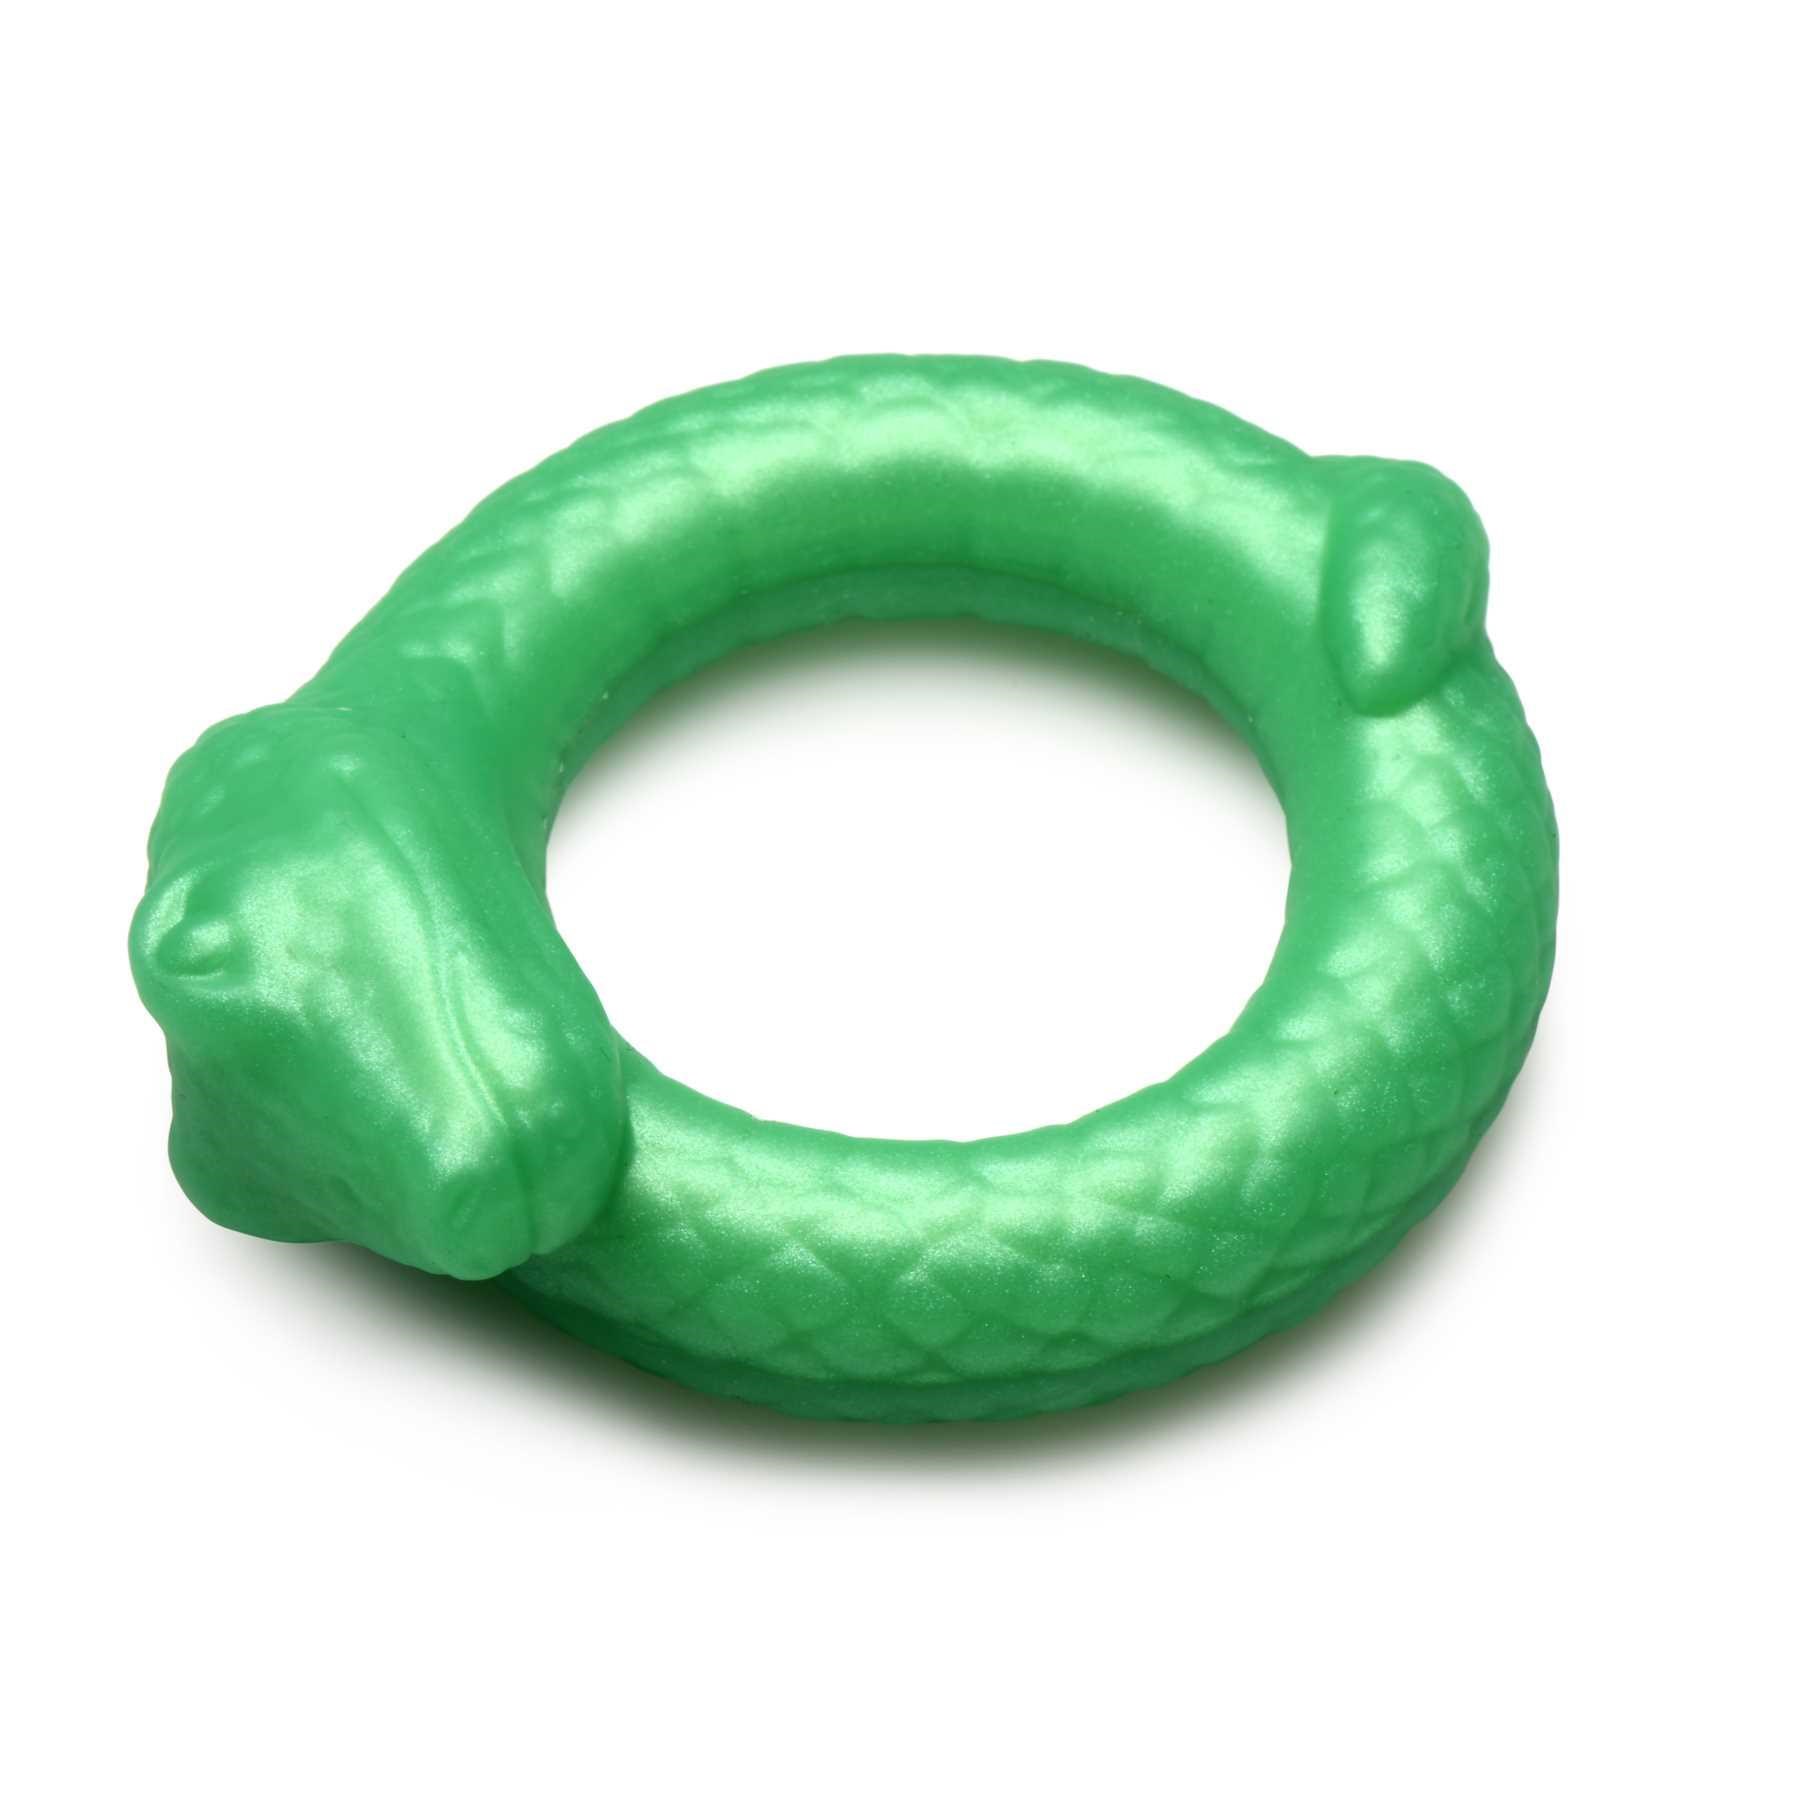 Creature Cocks Serpentine Silicone Cock Ring laying flat on table